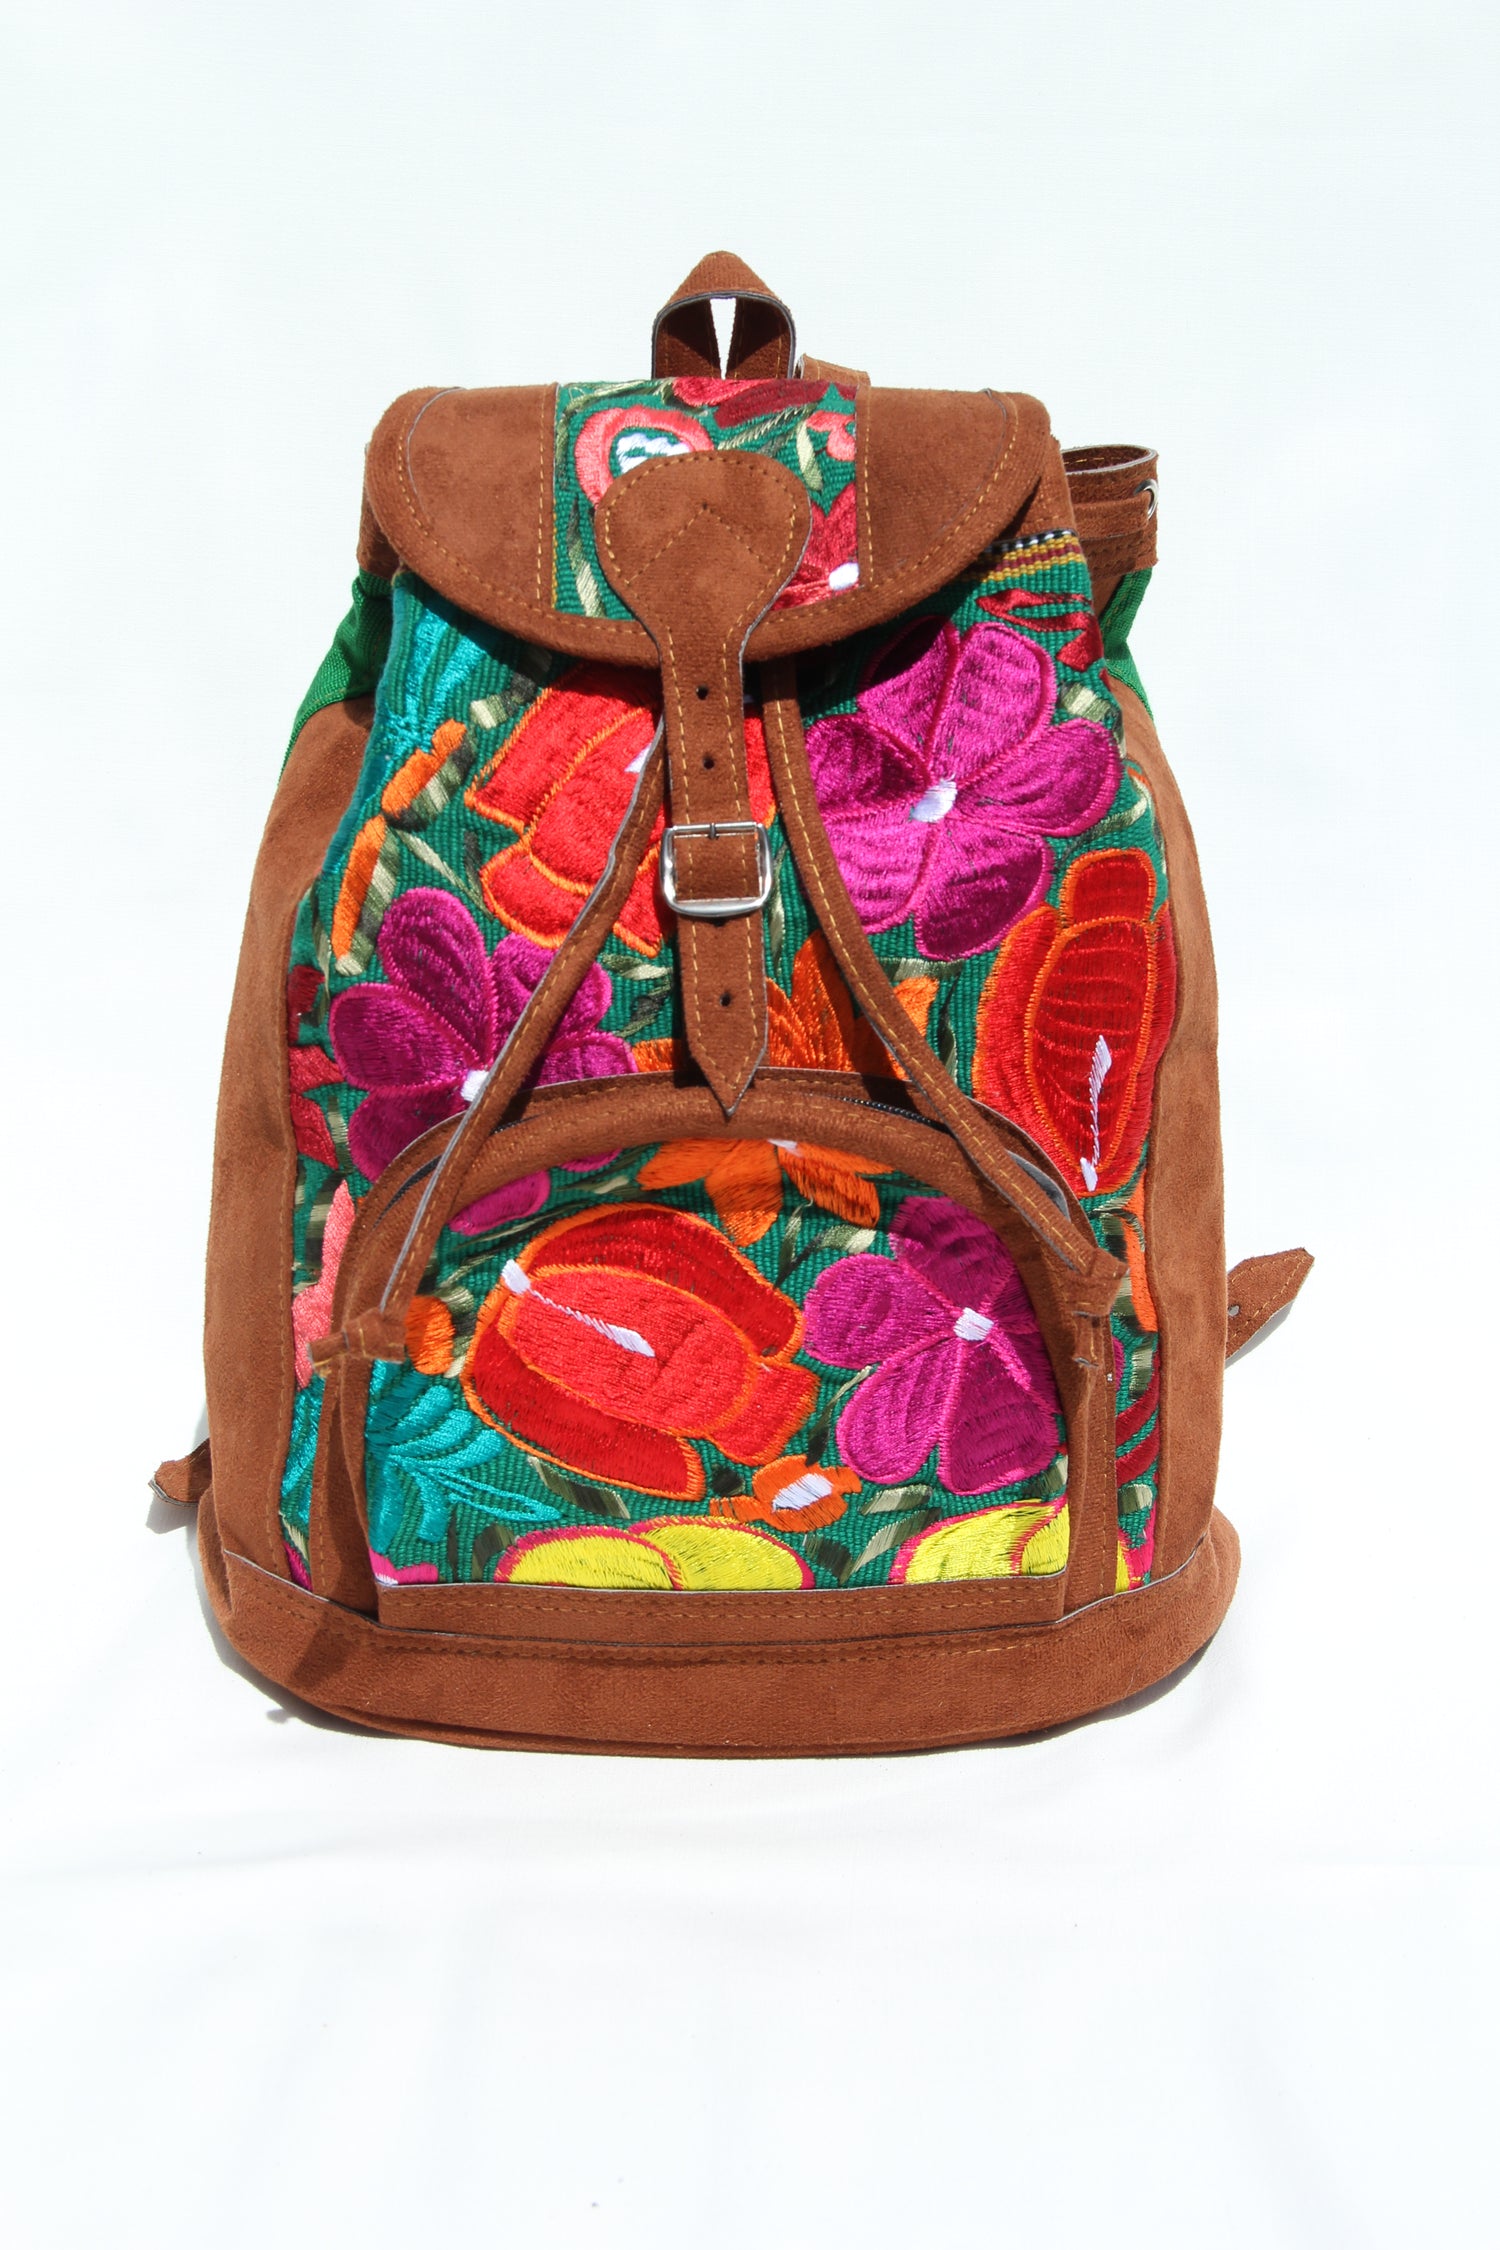 colorful huipil floral embroidery backpack green woven fabric and faux suede contrast with adjustable straps and front buckle closure with front zipper pocket the prefect travel, hiking or beach bag unique bag great for back to school take this bag on your next destination boho bag and hippie style bag a great standout accessories made in Guatemala